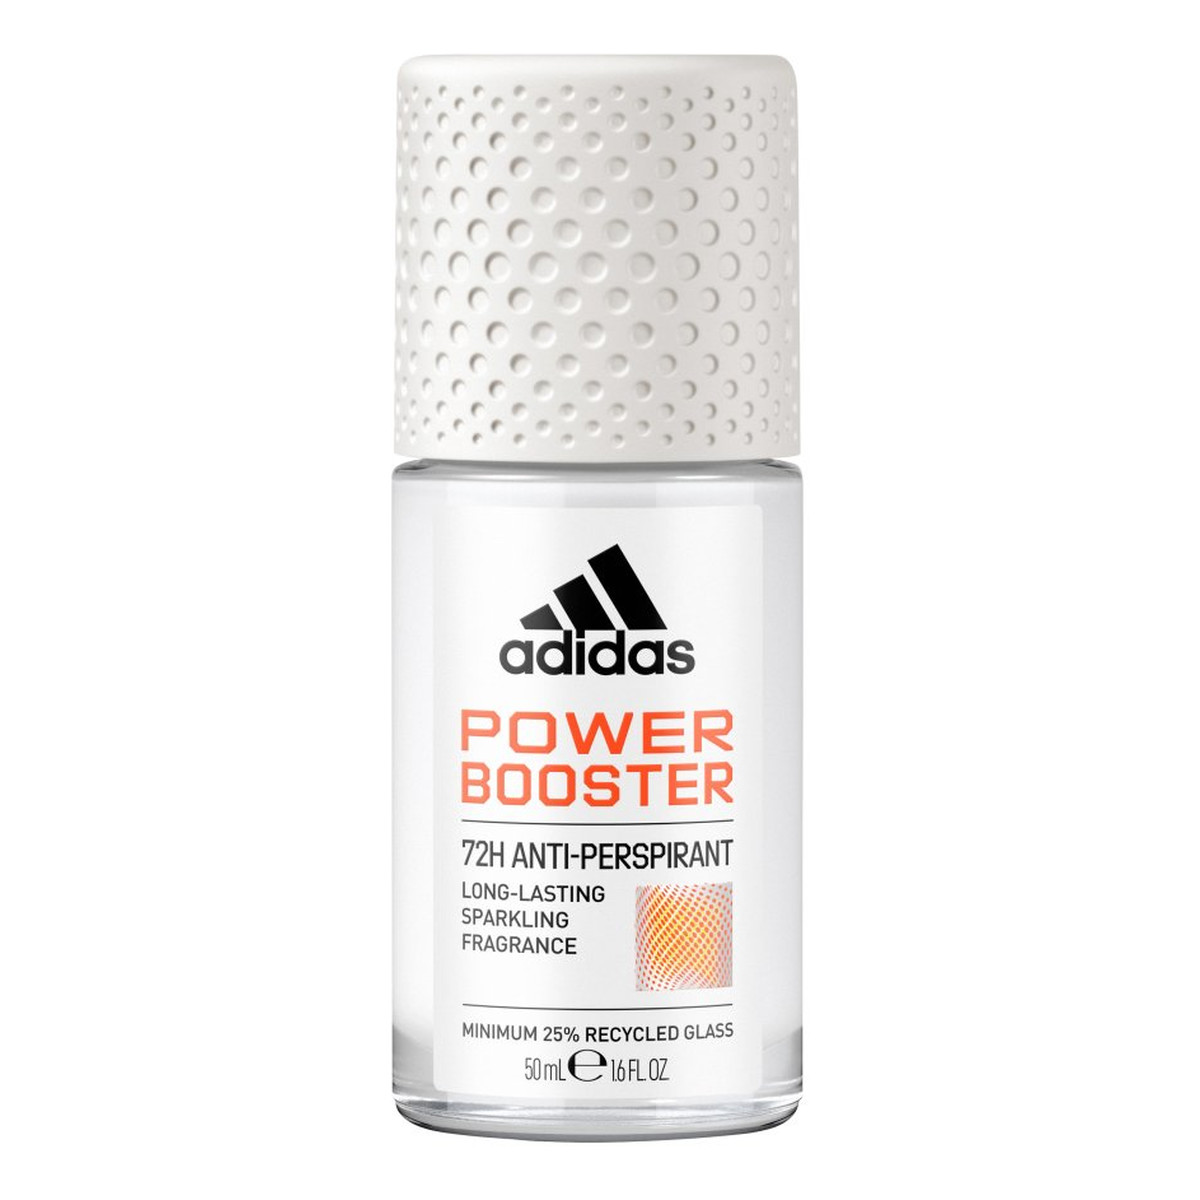 Adidas Power Booster Antyperspirant Roll-on 72H 50ml